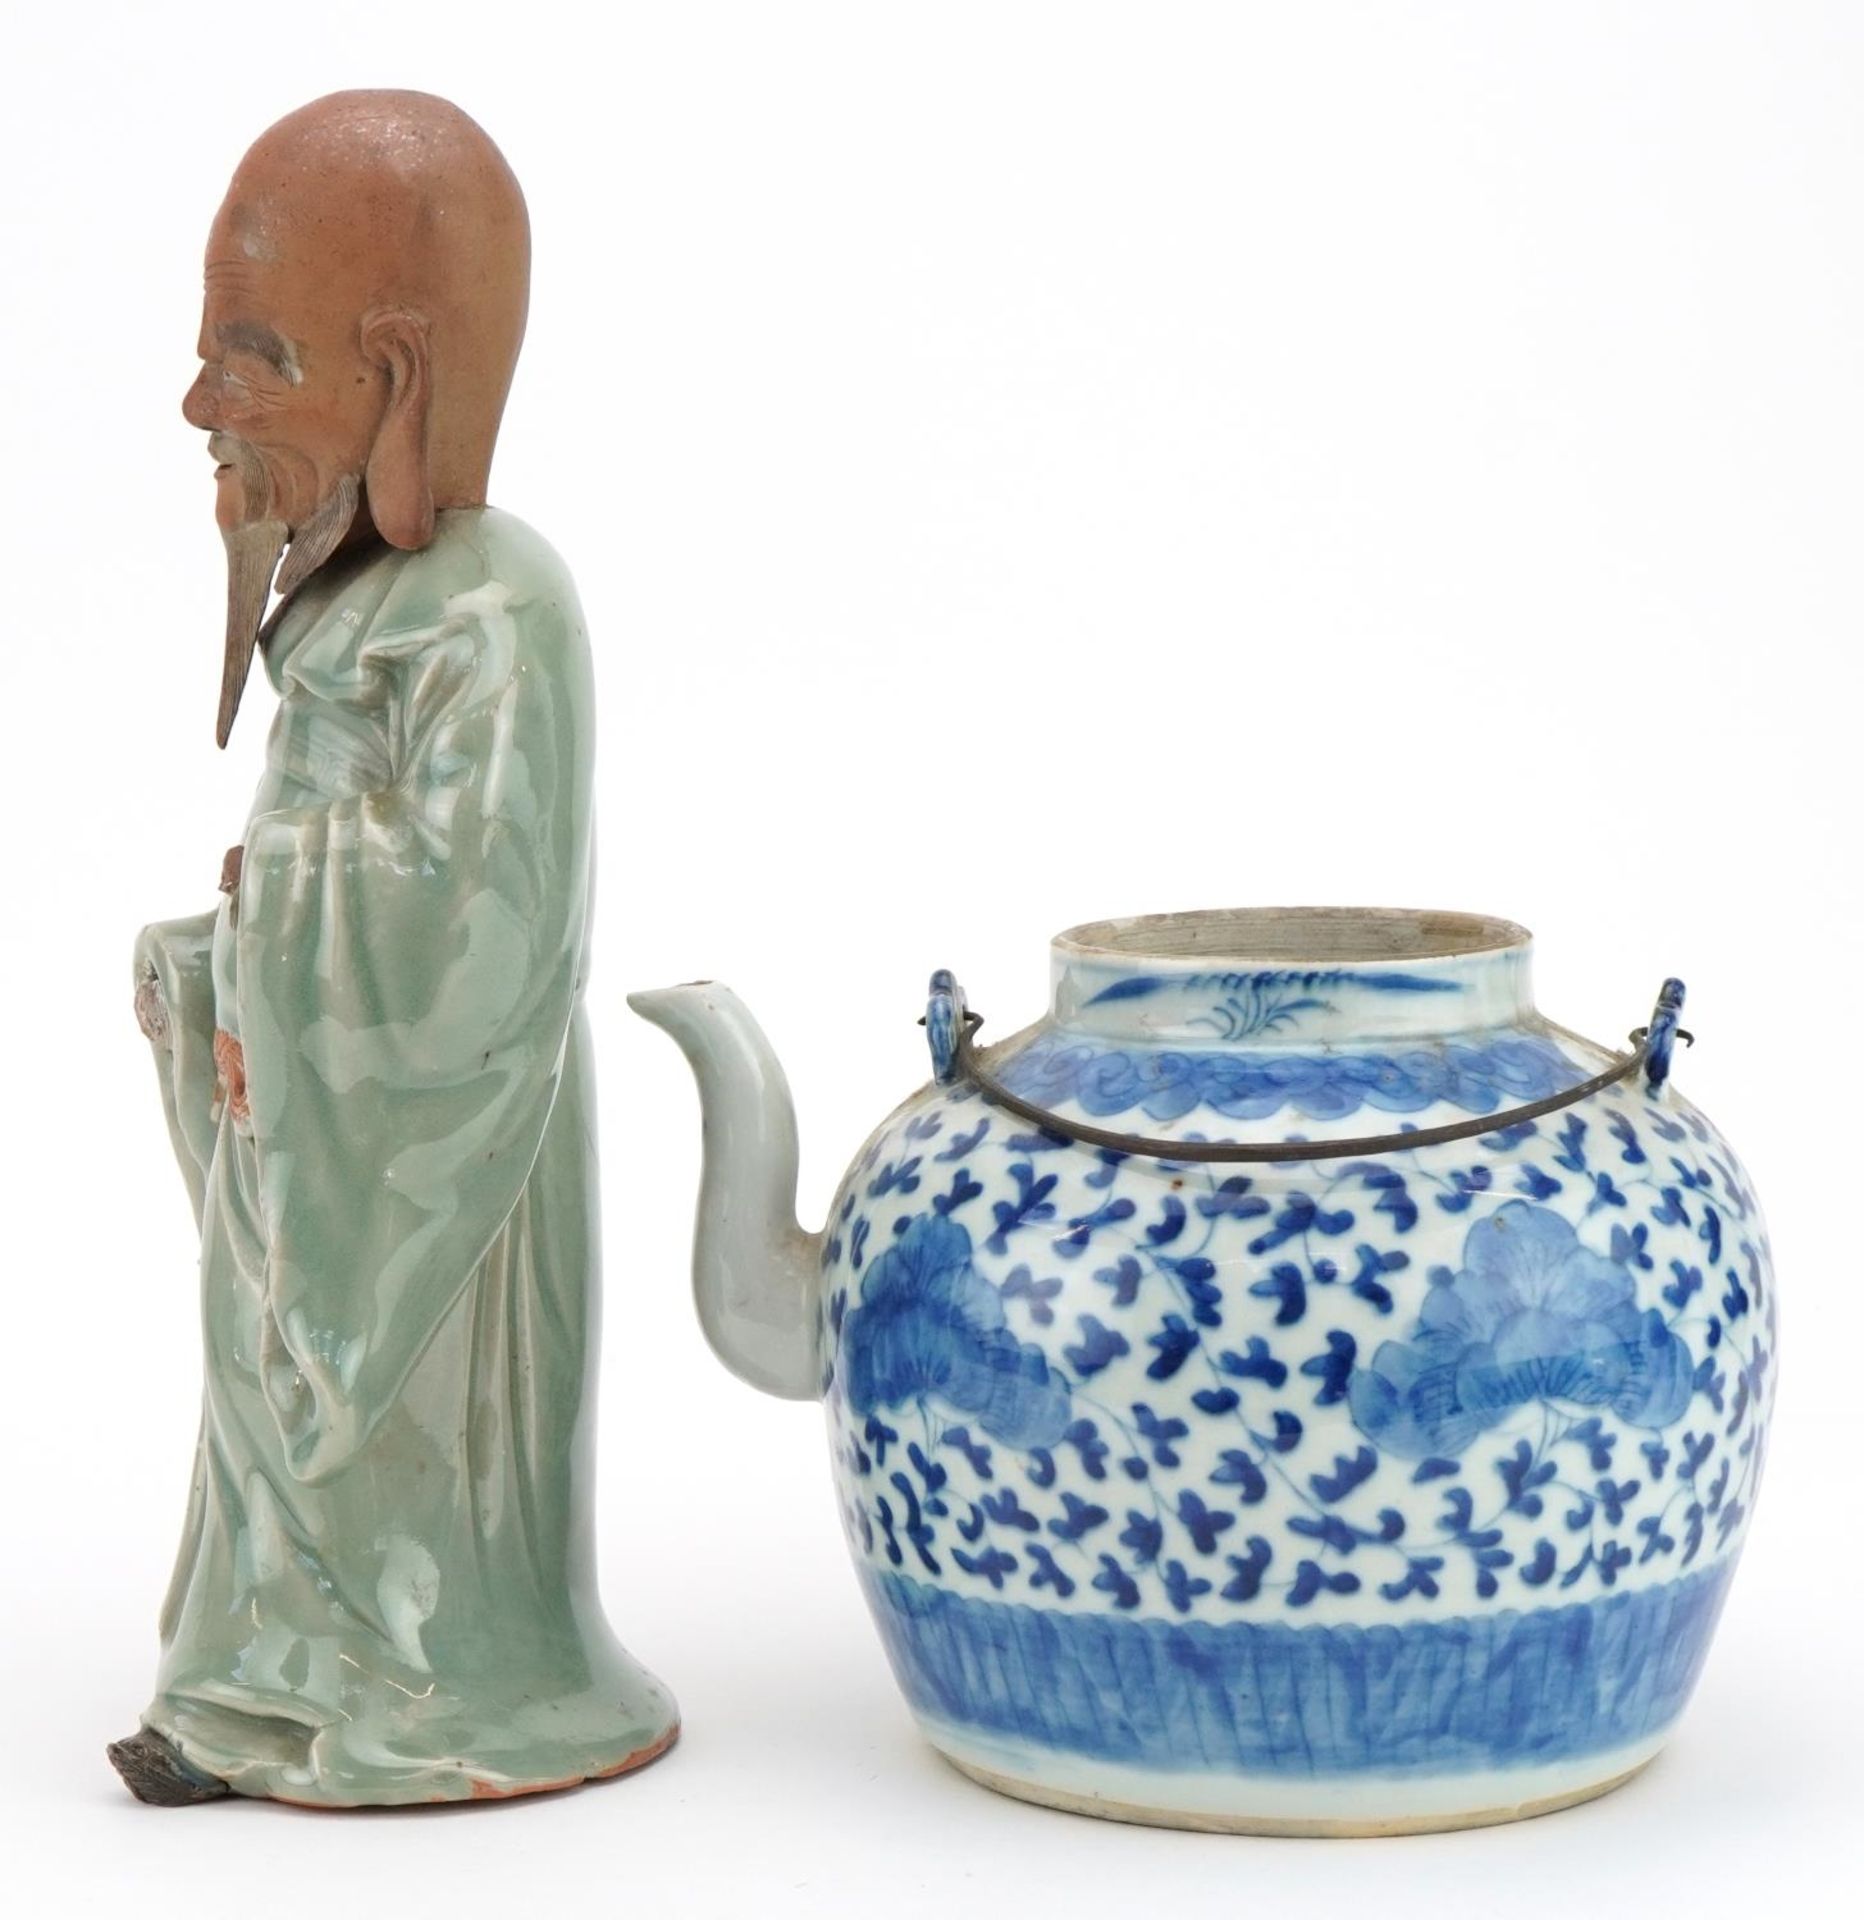 Chinese blue and white porcelain teapot and a celadon glazed figure, the largest 30cm high - Image 3 of 7